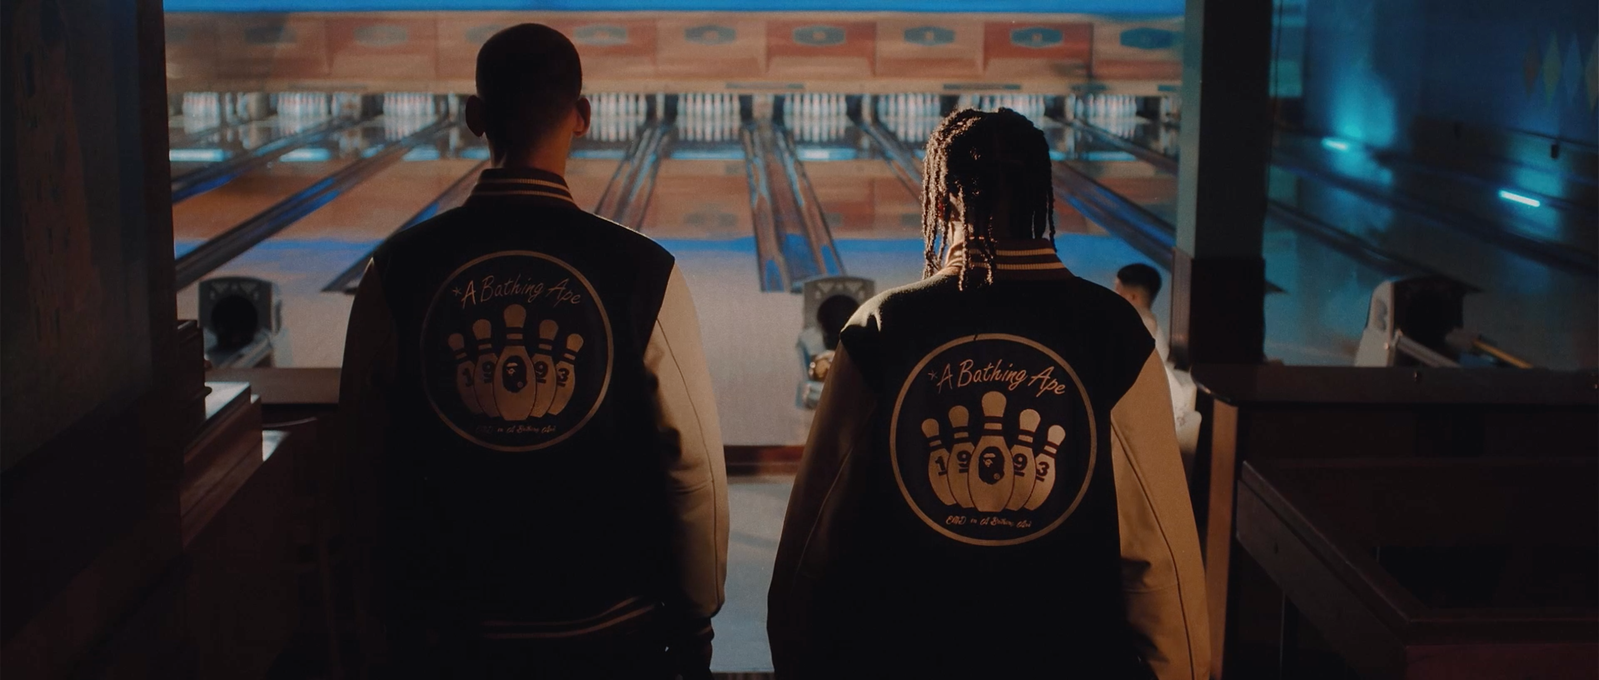 Silhouette of two competitors wearing the product and entering the bowling alley.